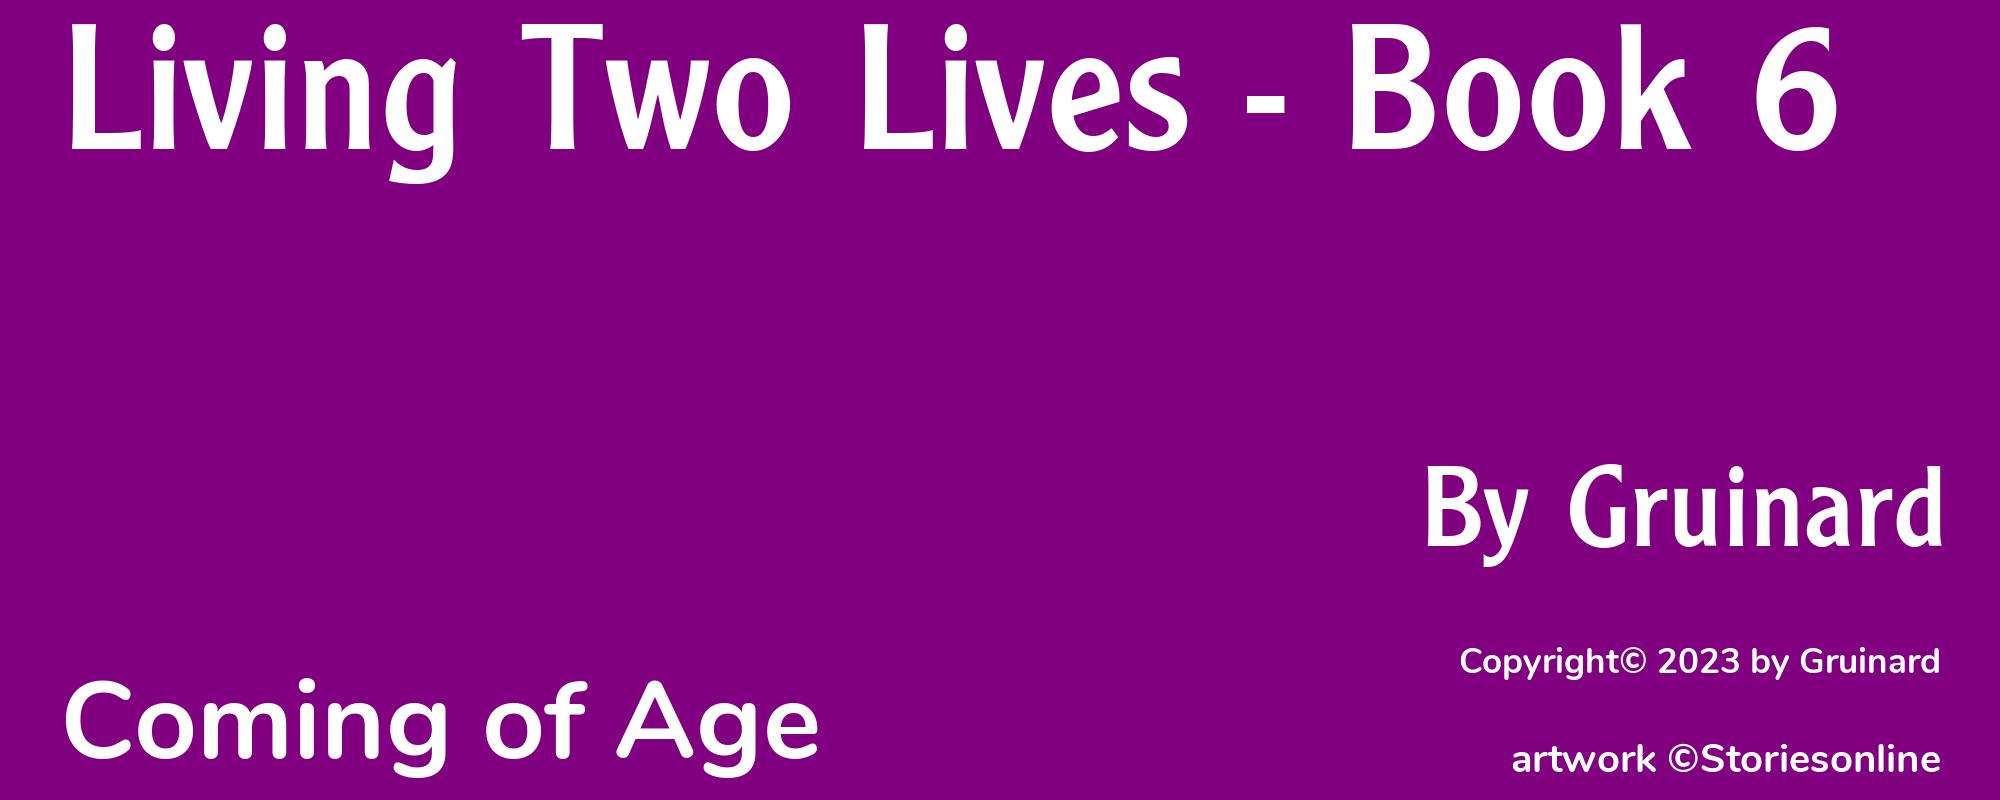 Living Two Lives - Book 6 - Cover